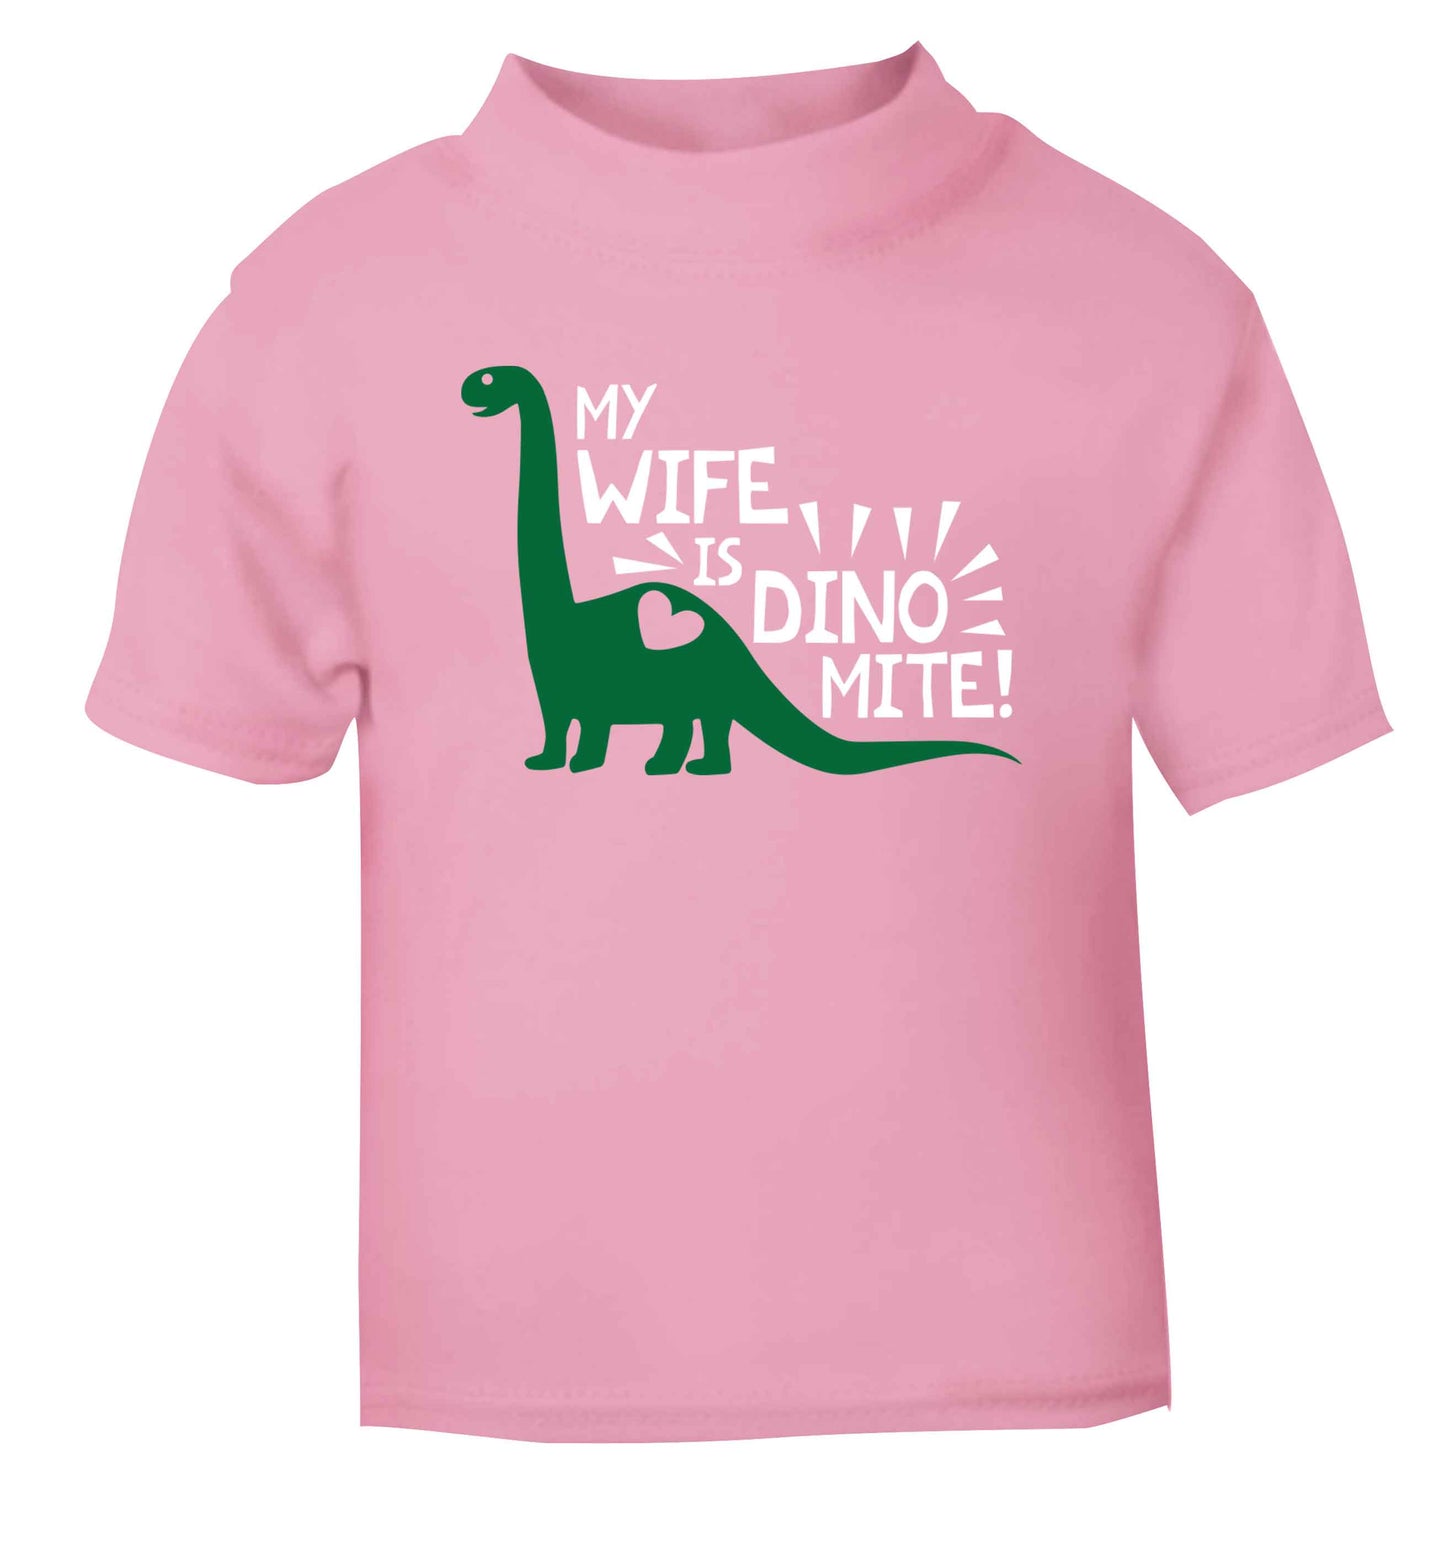 My wife is dinomite! light pink Baby Toddler Tshirt 2 Years